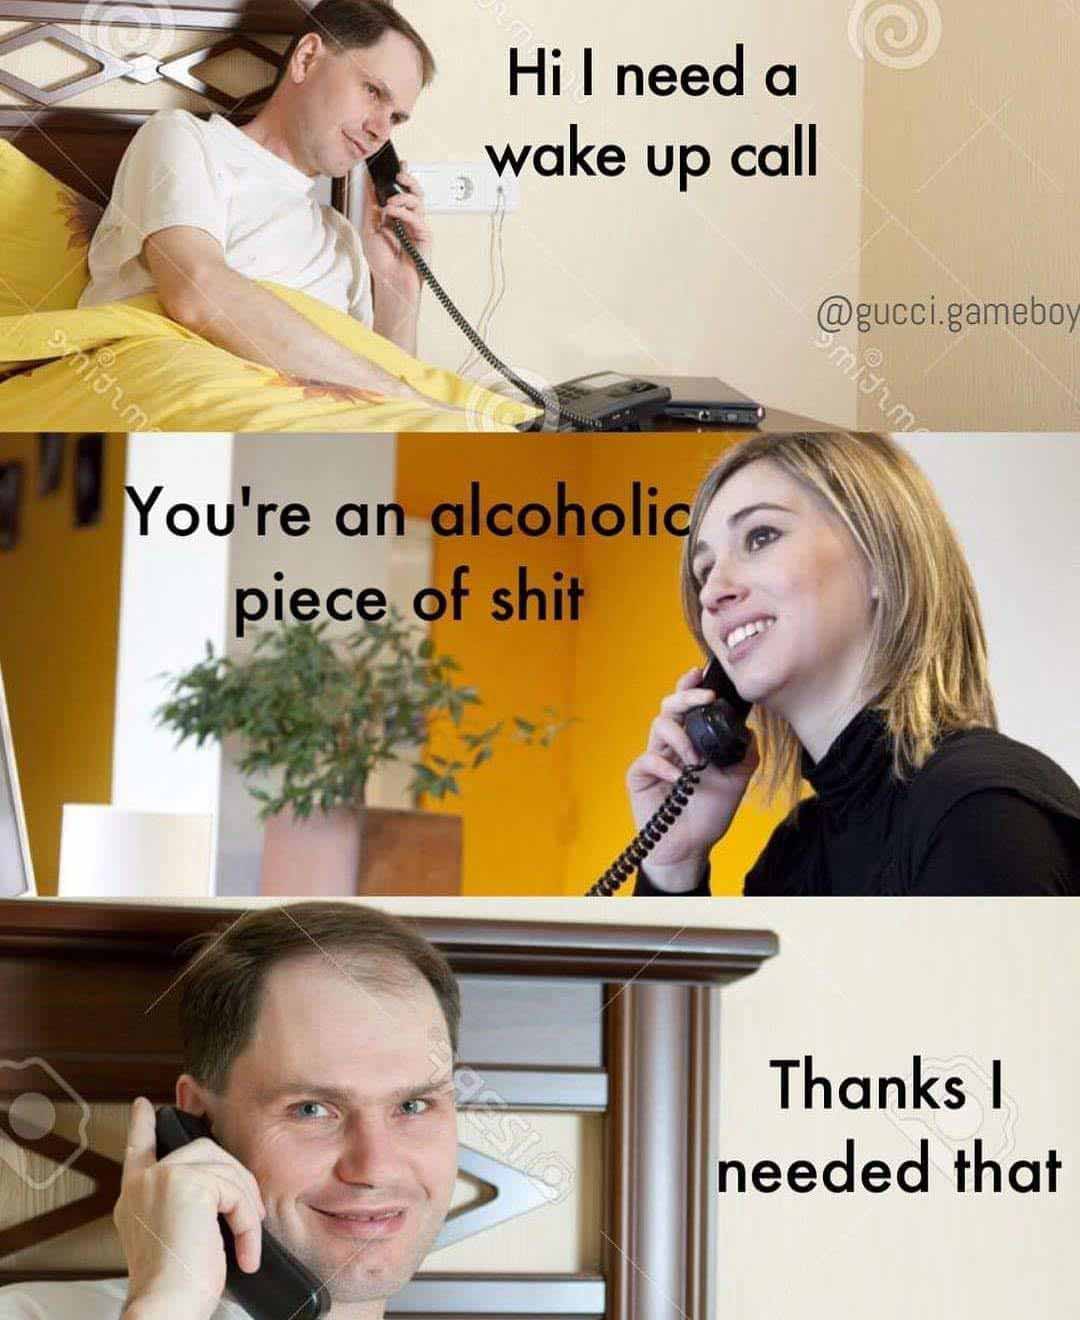 Funny picture where a guy calls the front desk of a hotel and says 'hi i need a wake up call' and the front desk woman says 'you're an alcoholic piece of shit' and he smiles and says 'thanks i needed that'